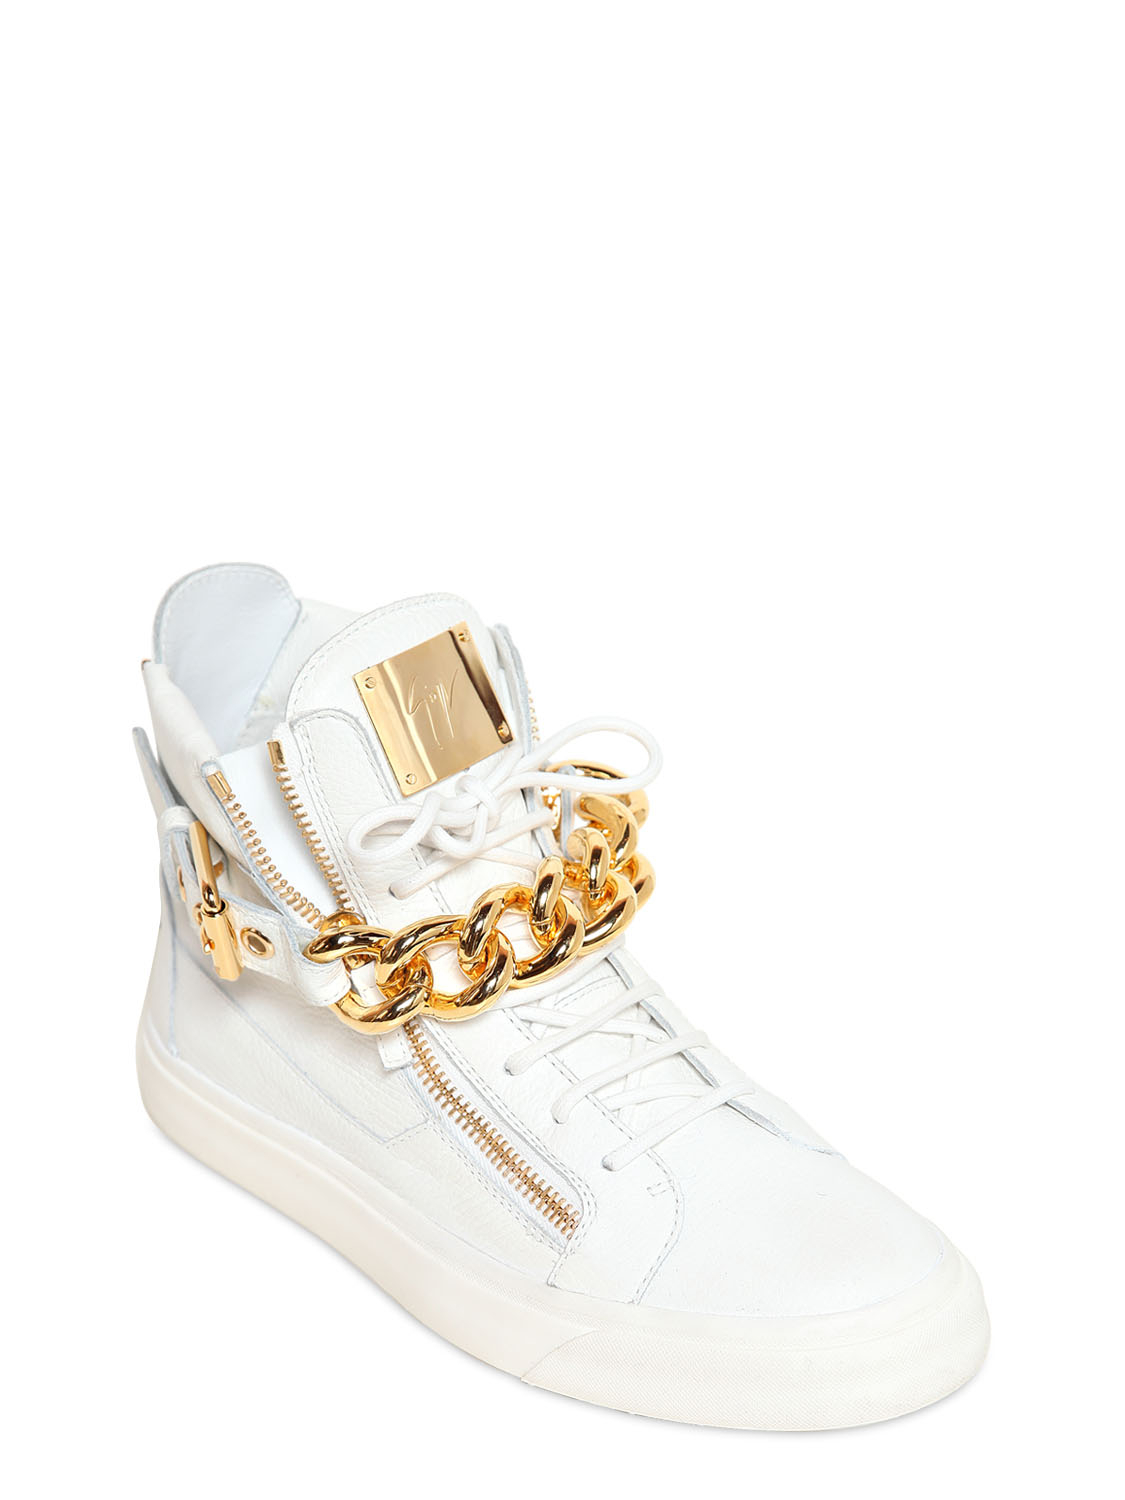 Giuseppe Zanotti Metal Chain Leather High Top Sneakers in White for Men |  Lyst